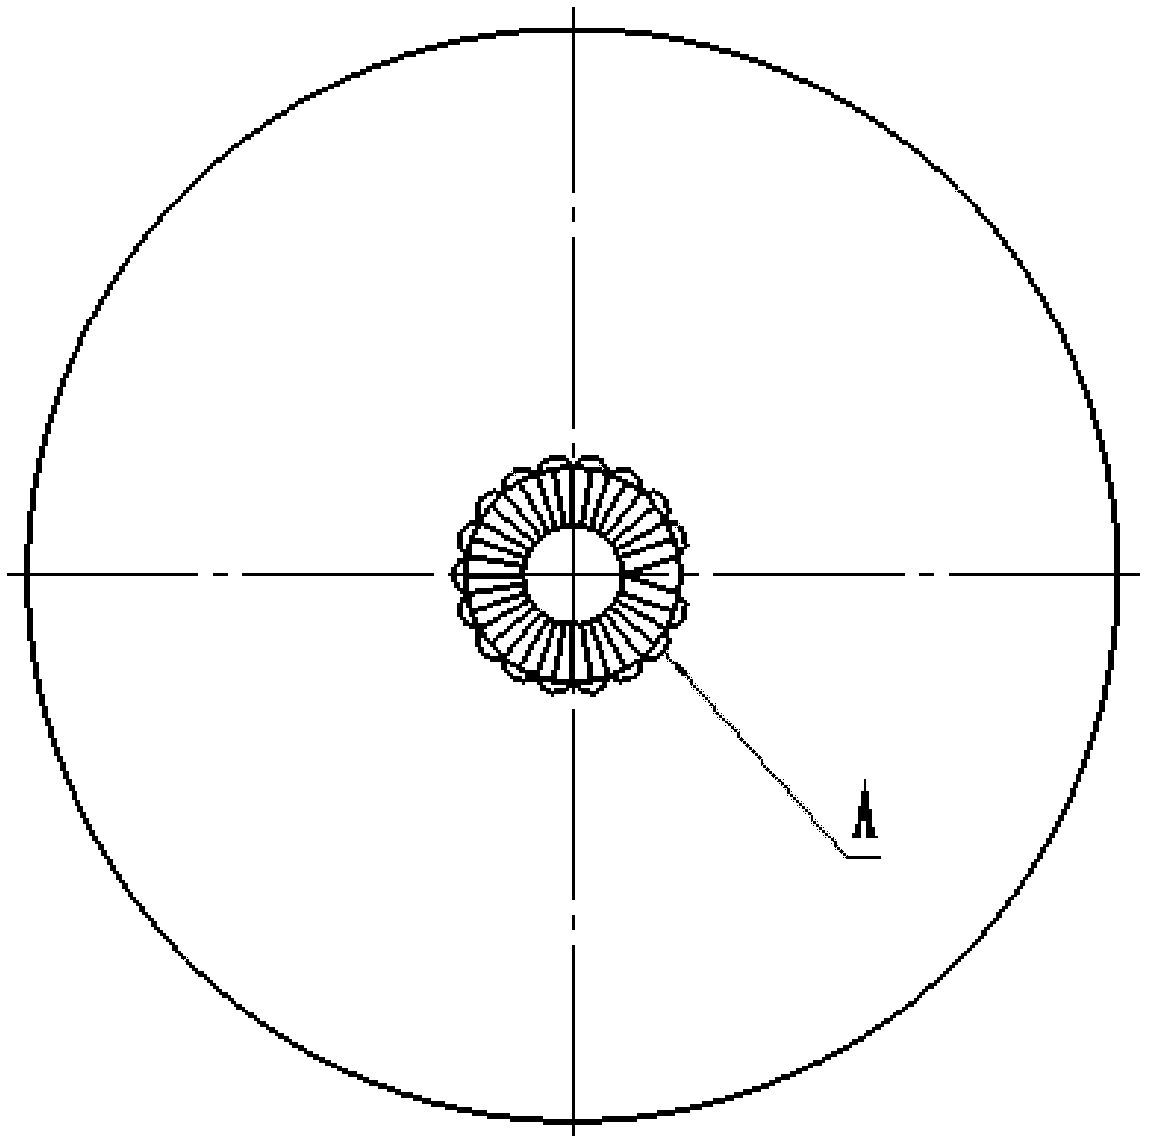 Processing method for engine crankshaft vibration damping pulley wheel hub with end surface rat fluted disc